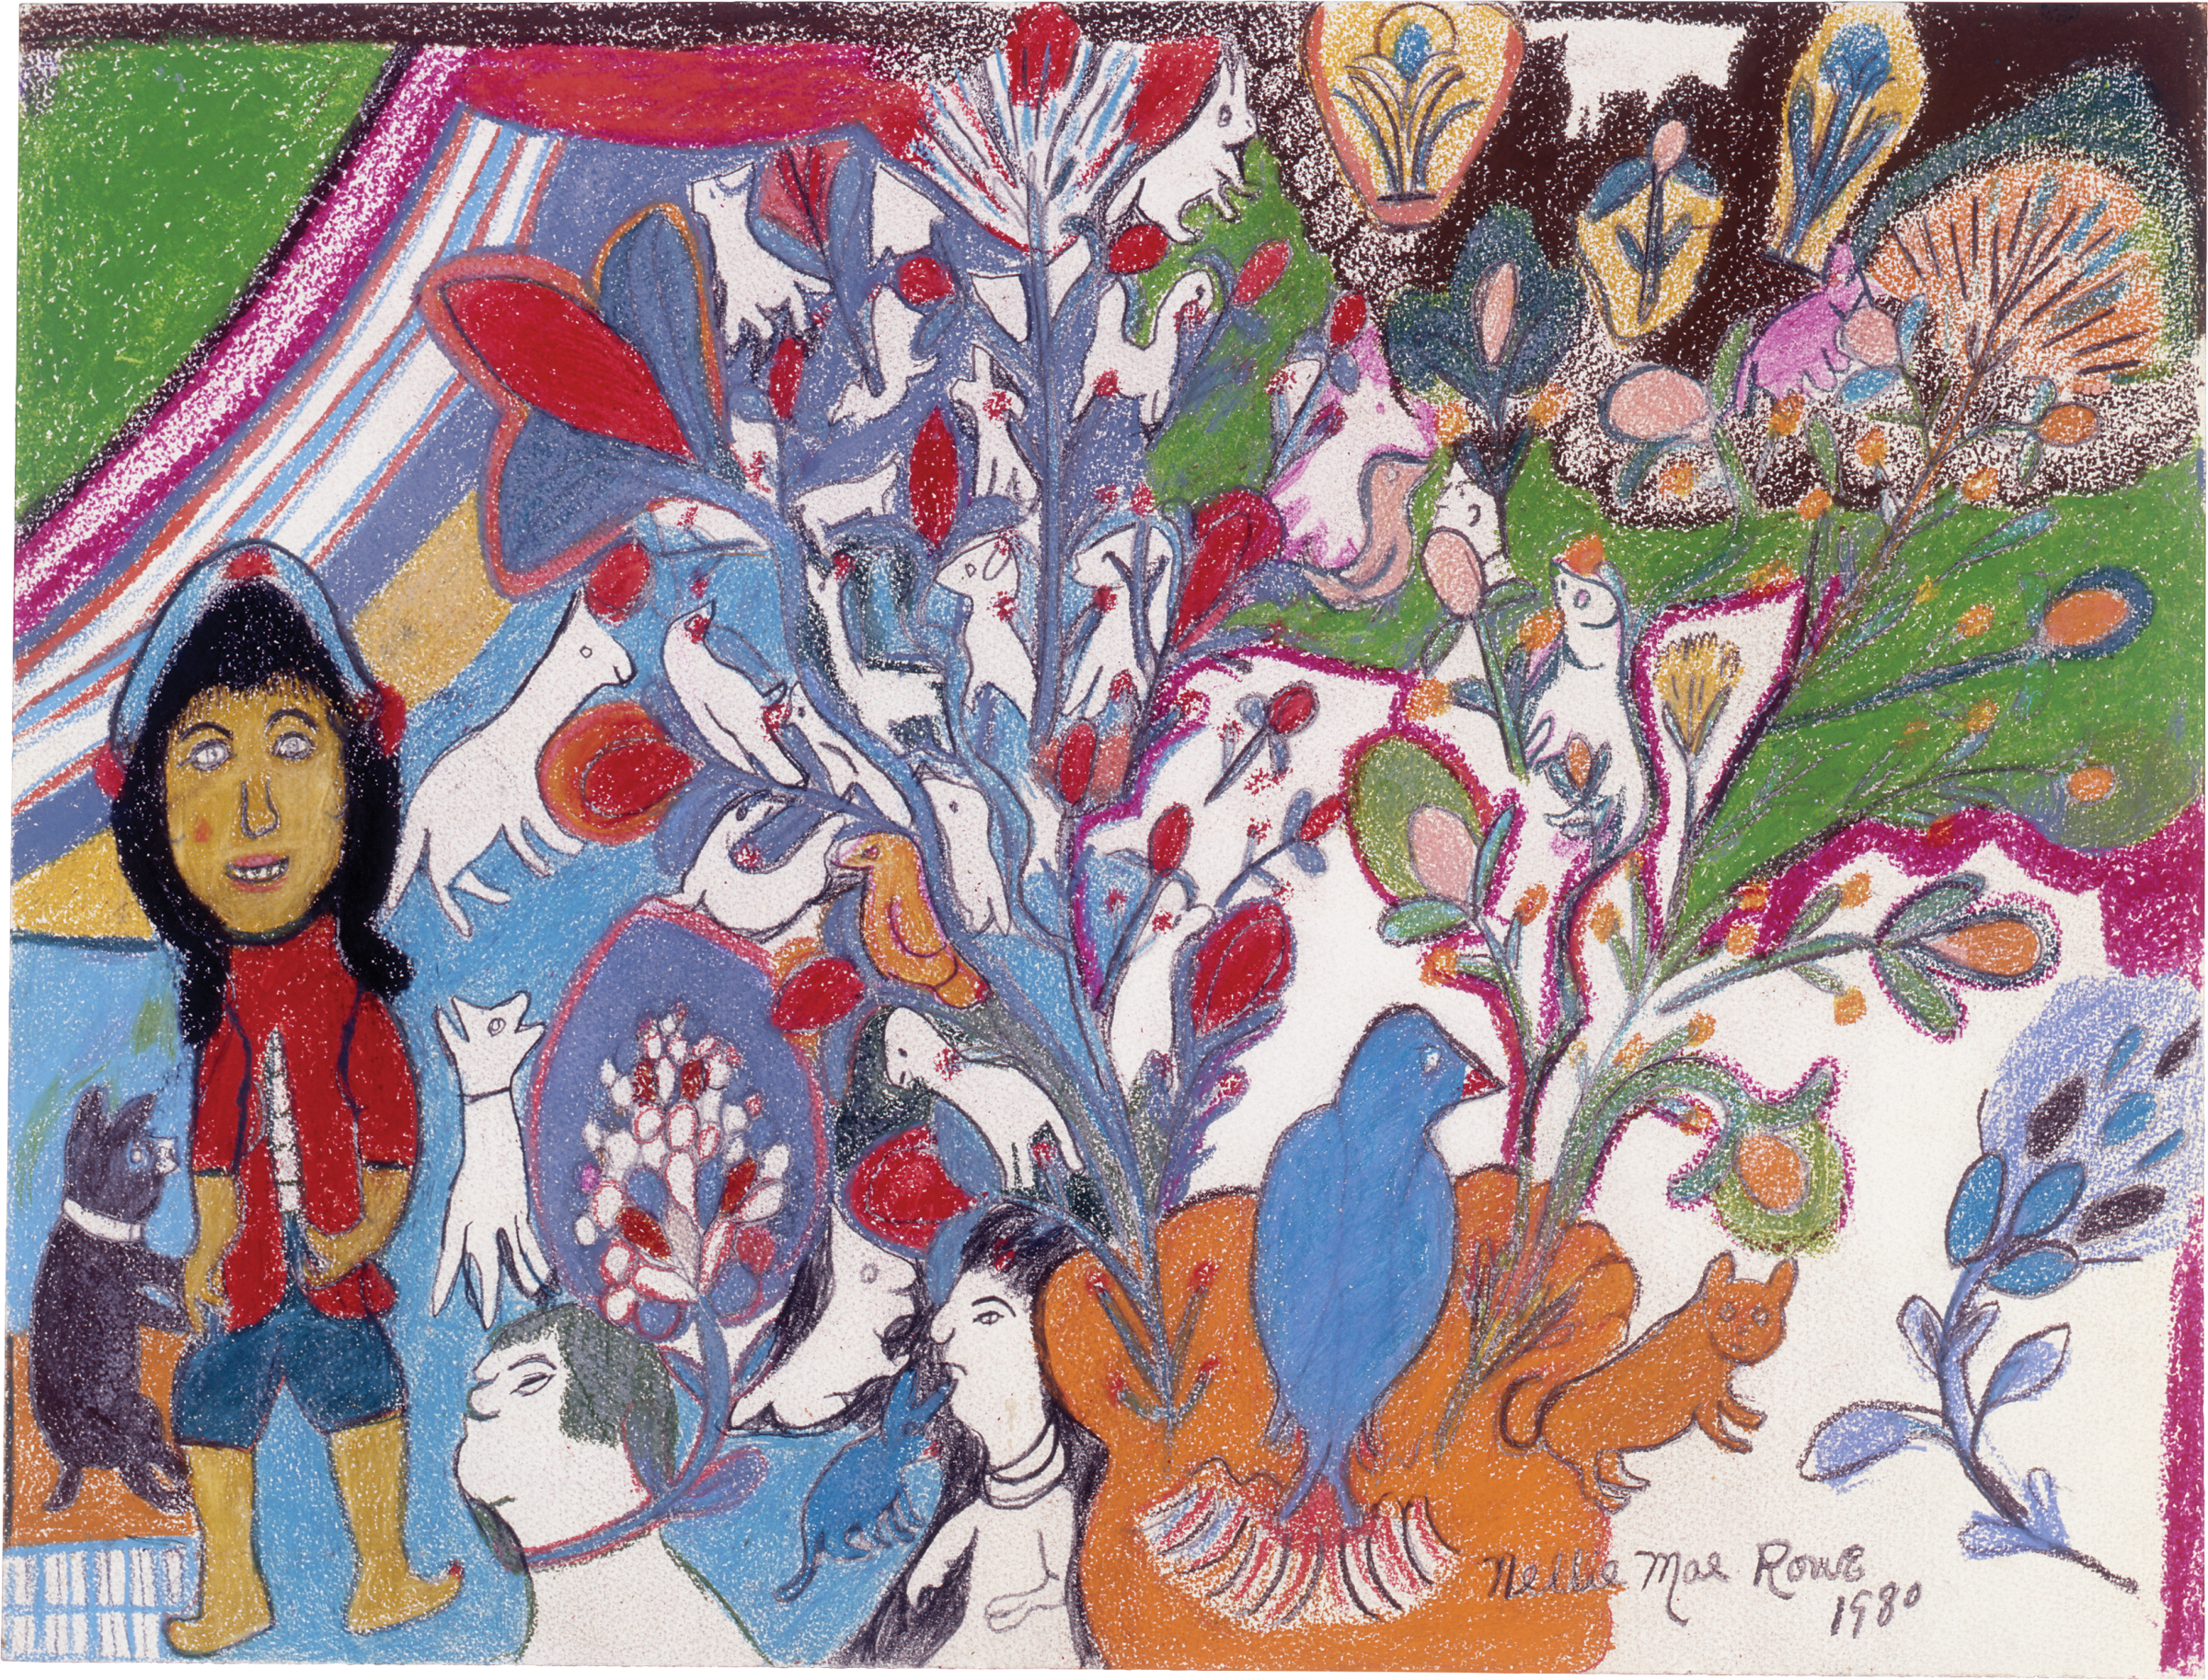 A smiling girl in a red vest stands among dogs, birds, plants, and other figures; a blue bird sits between two large trees sprouting from a patch of orange with small animals among the foliage.